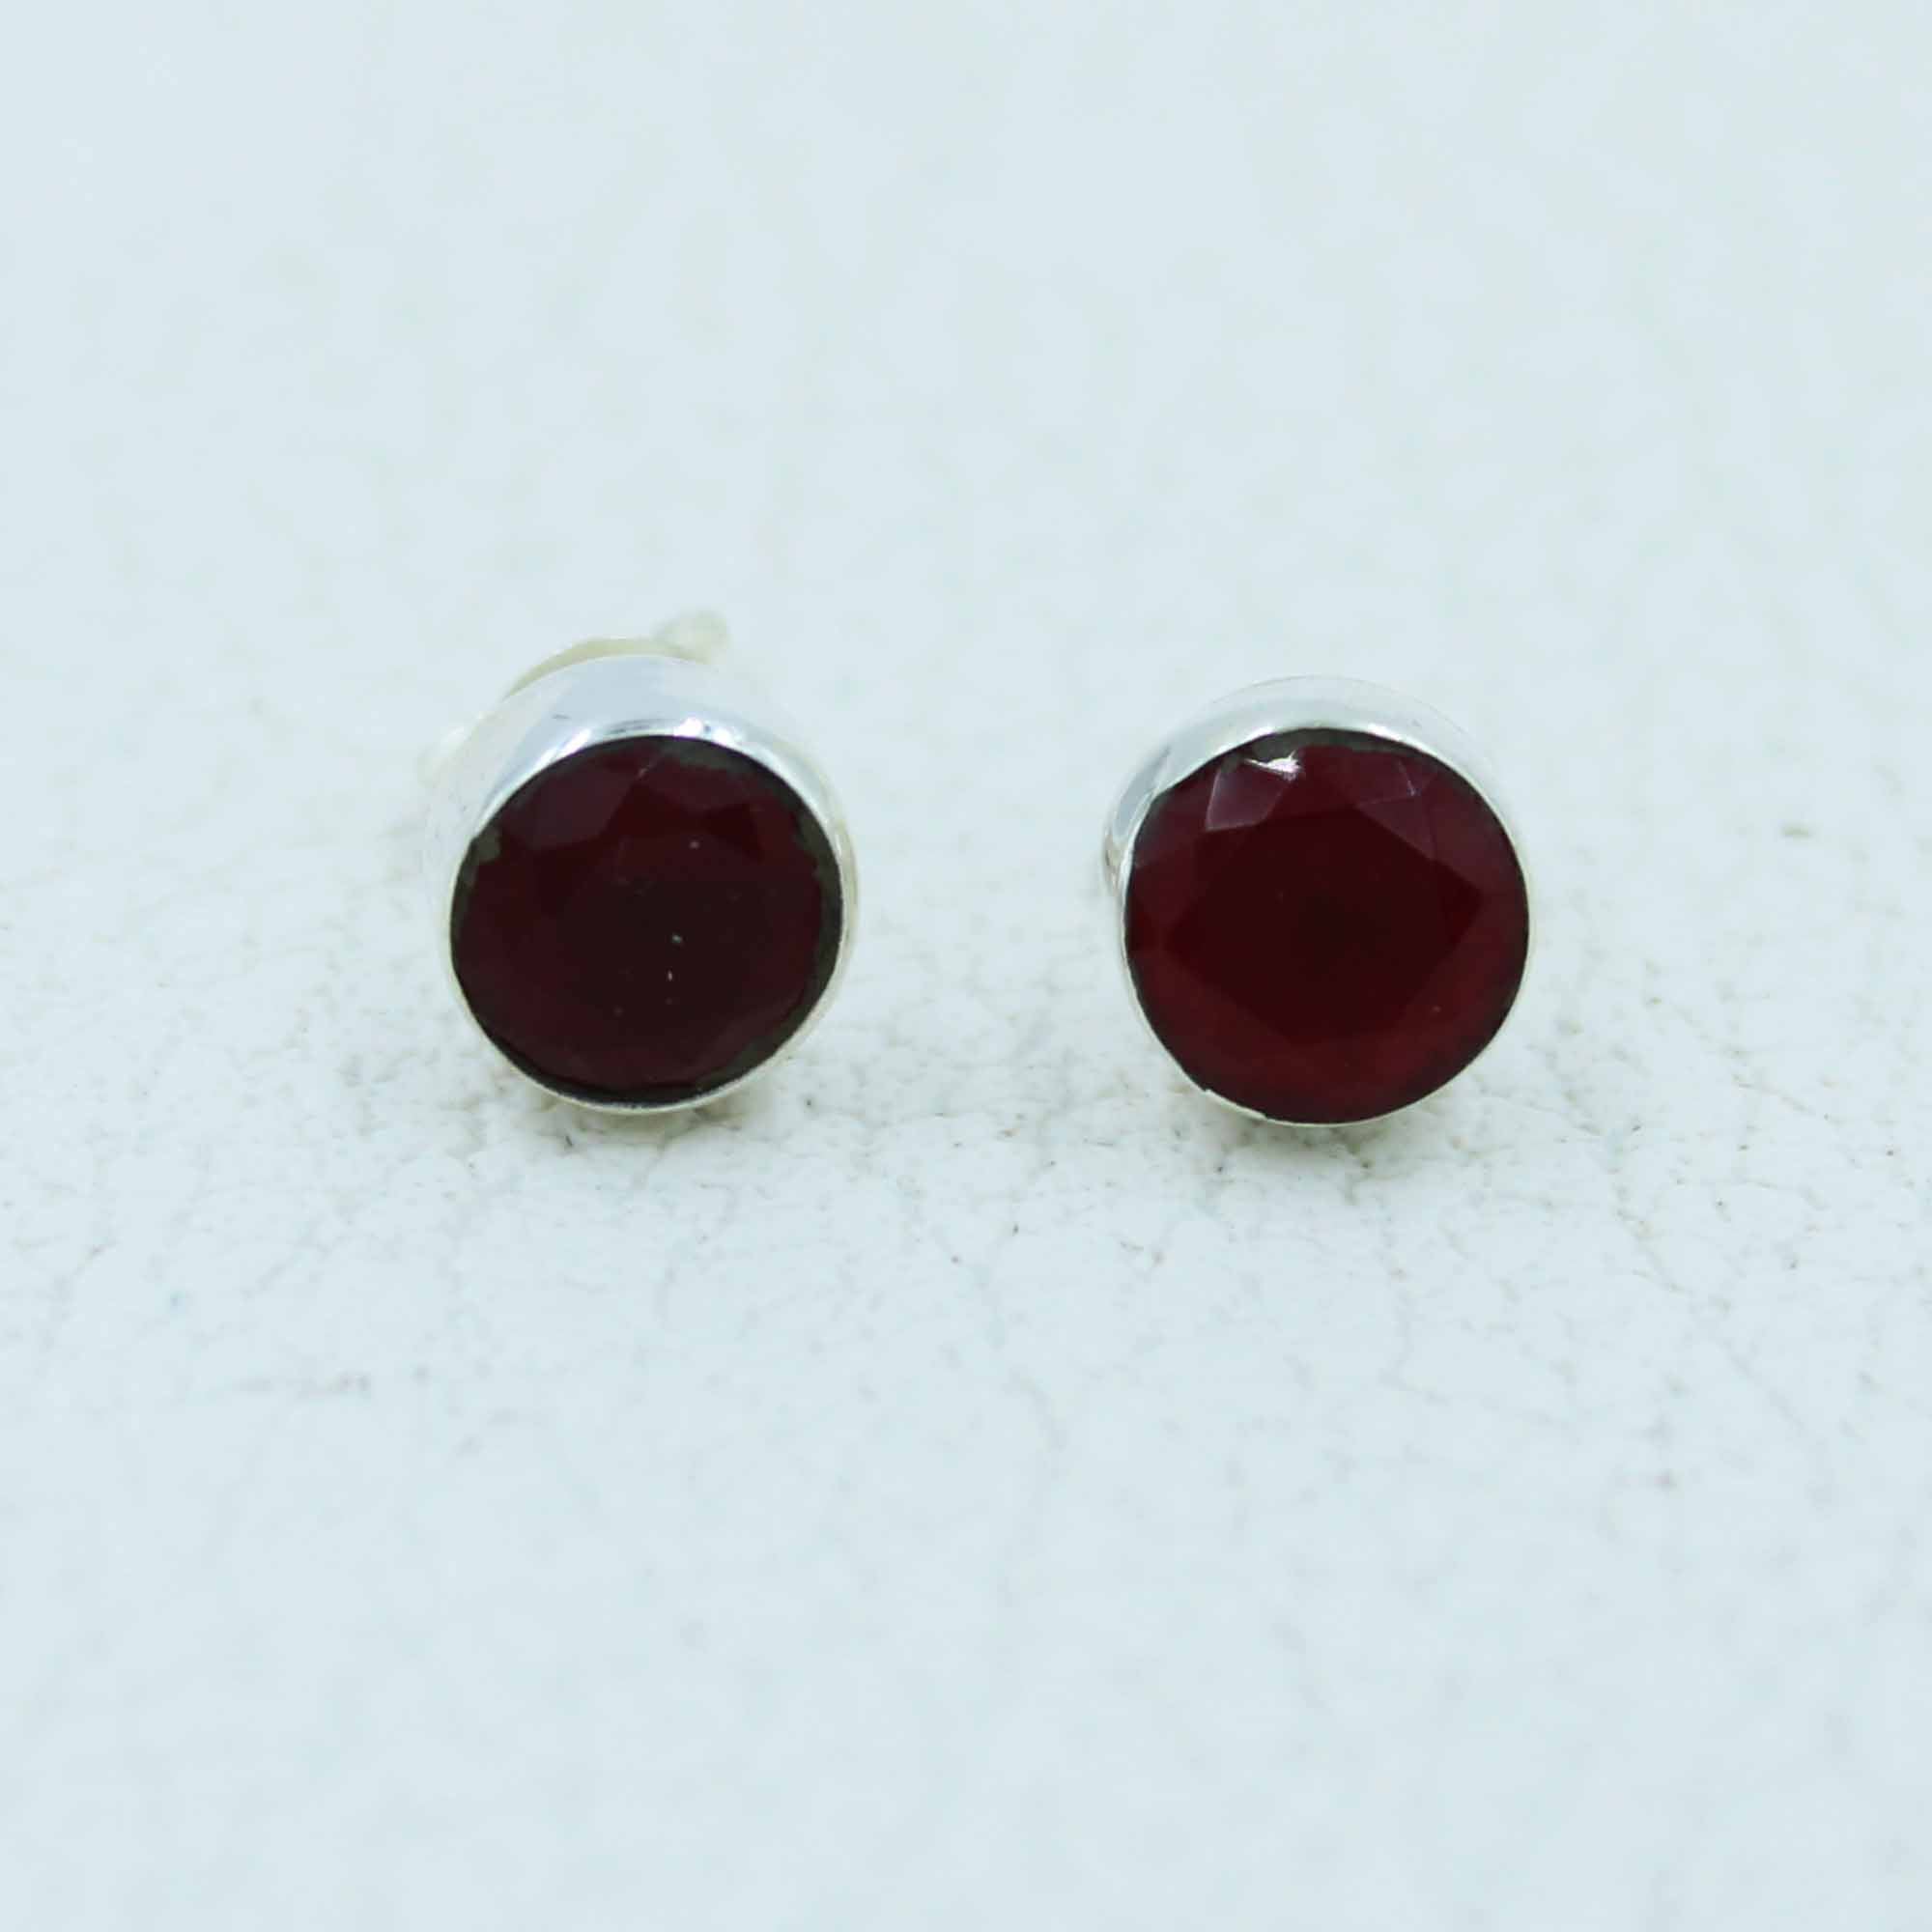 Ruby and Emerald Studs Earrings - 12 Pair Jewelry